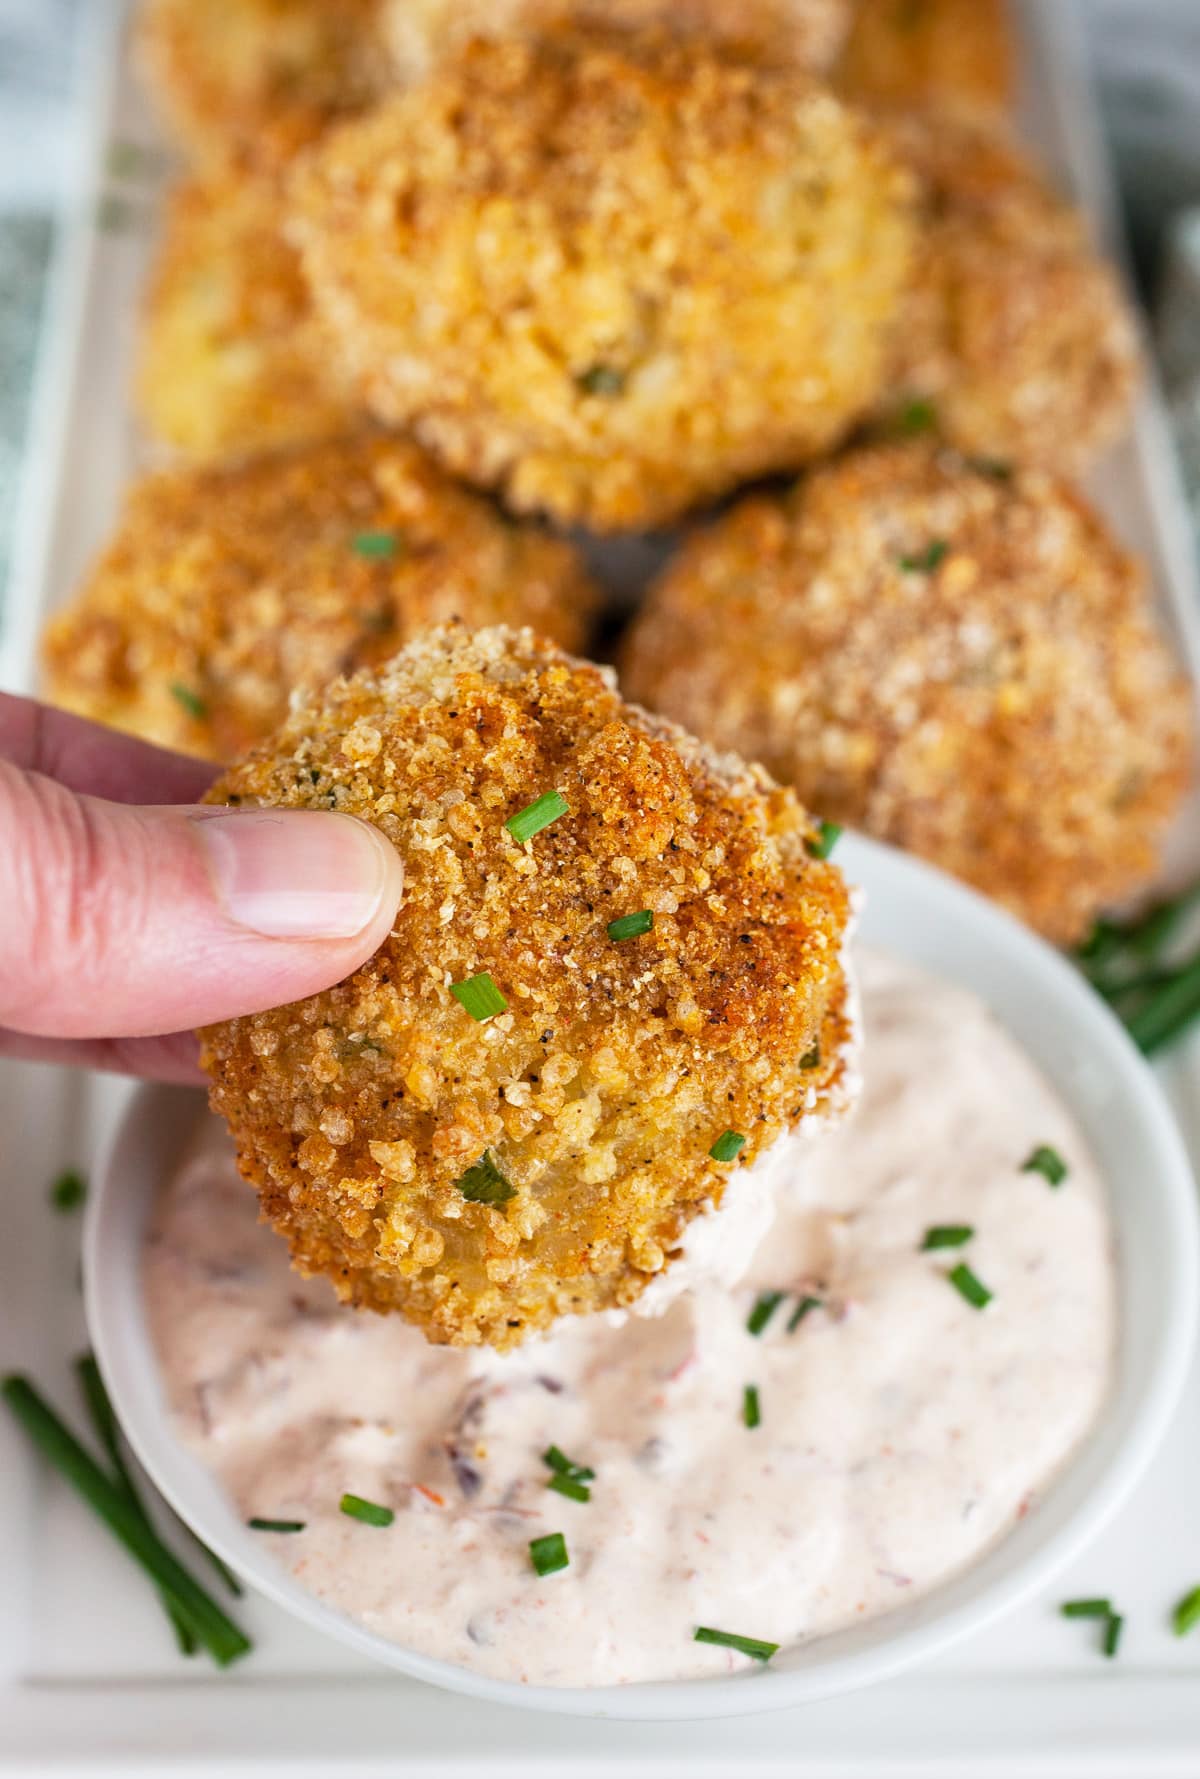 Baked rice balls dipped into chipotle sour cream.